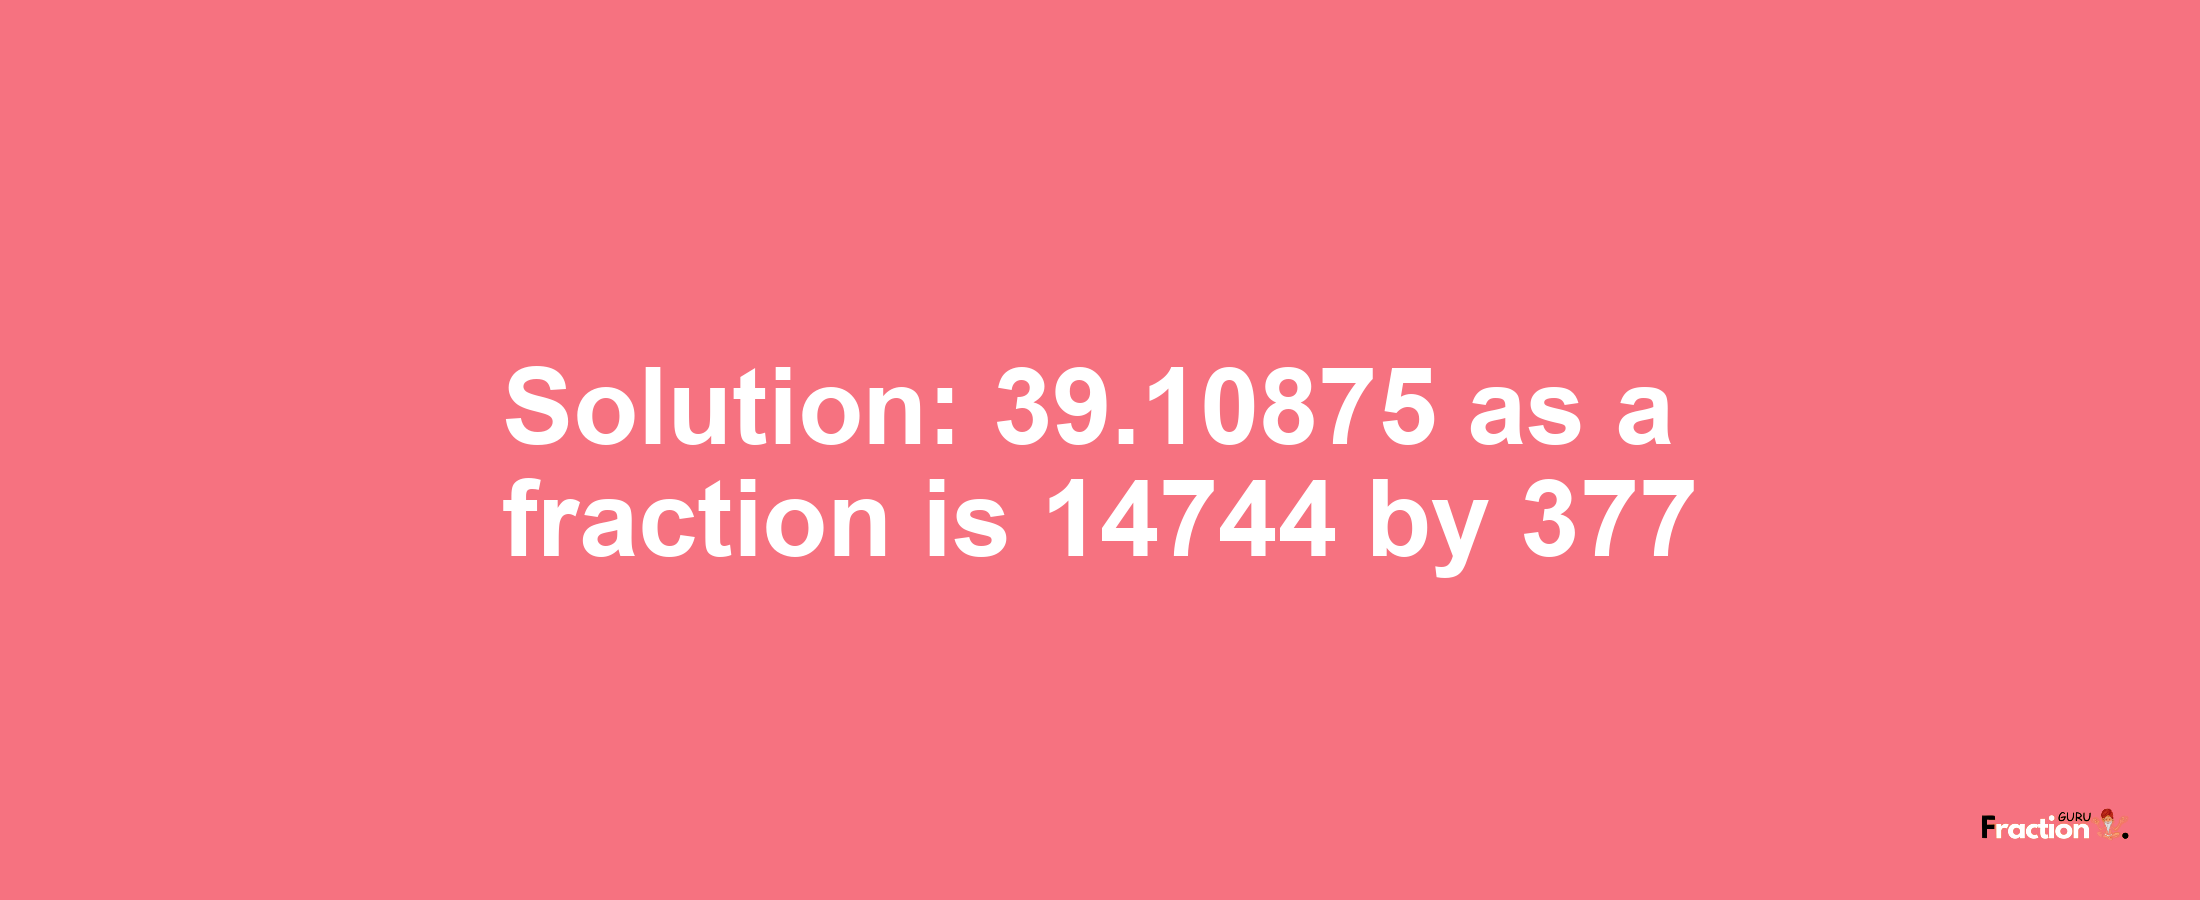 Solution:39.10875 as a fraction is 14744/377